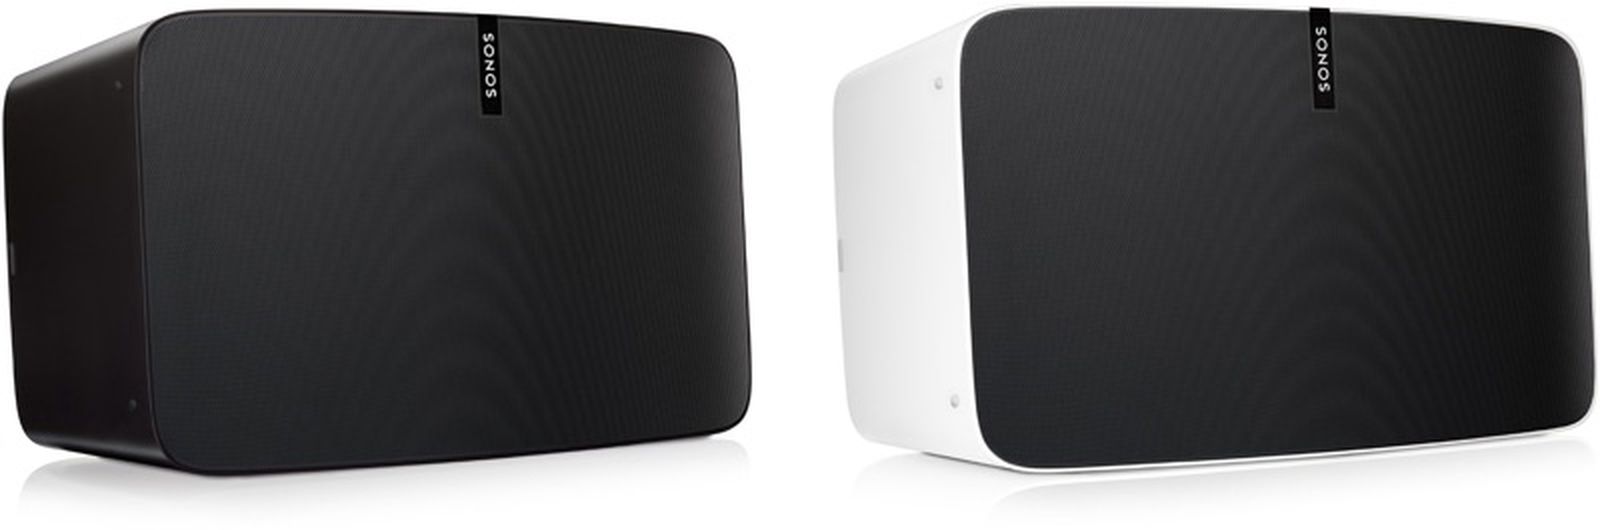 Ledsager reservedele Monument Sonos Play:5 Review - MacRumors